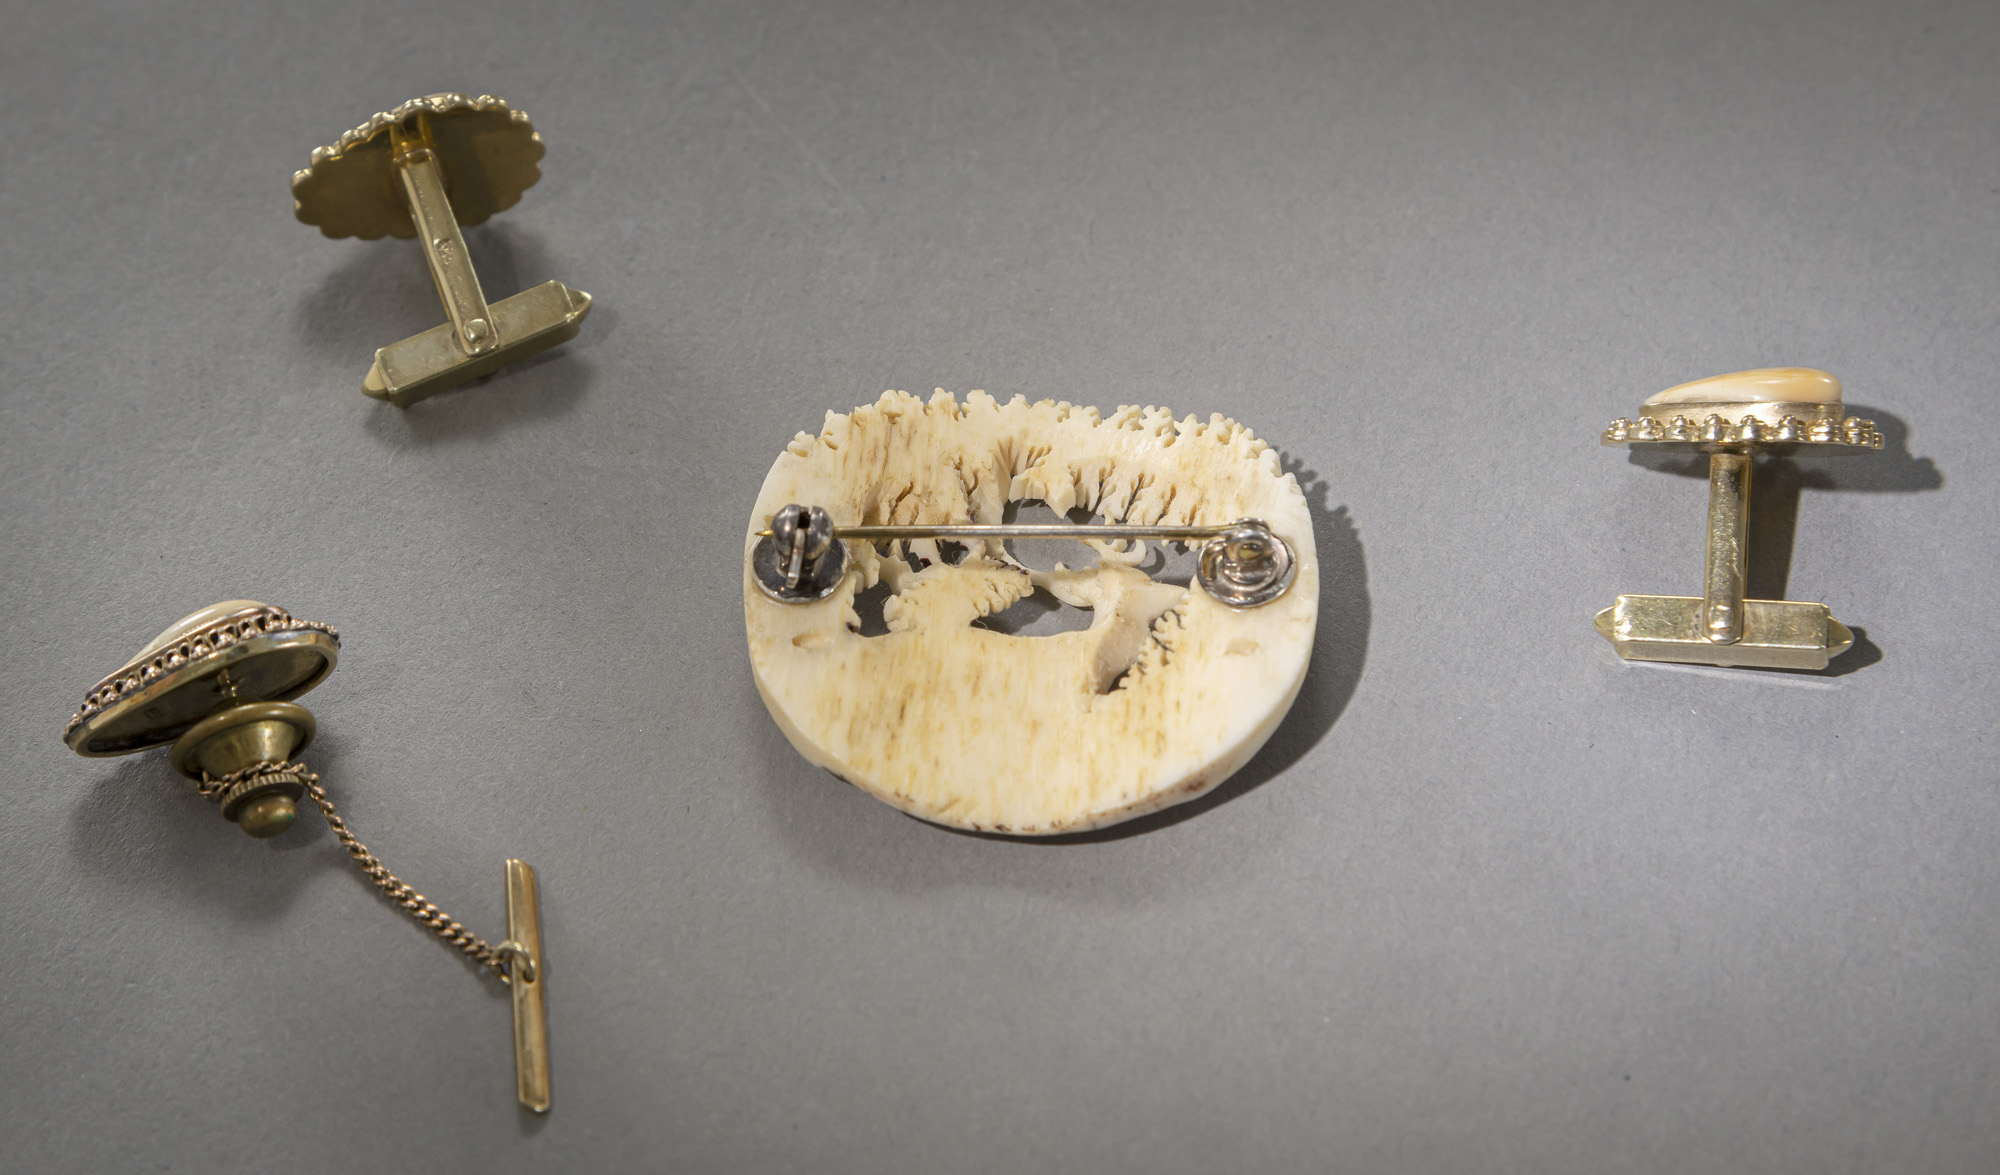 A CARVED BONE HUNTING BROOCH, A PAIR OF CUFF LINKS AND A STICK PIN - Image 3 of 3